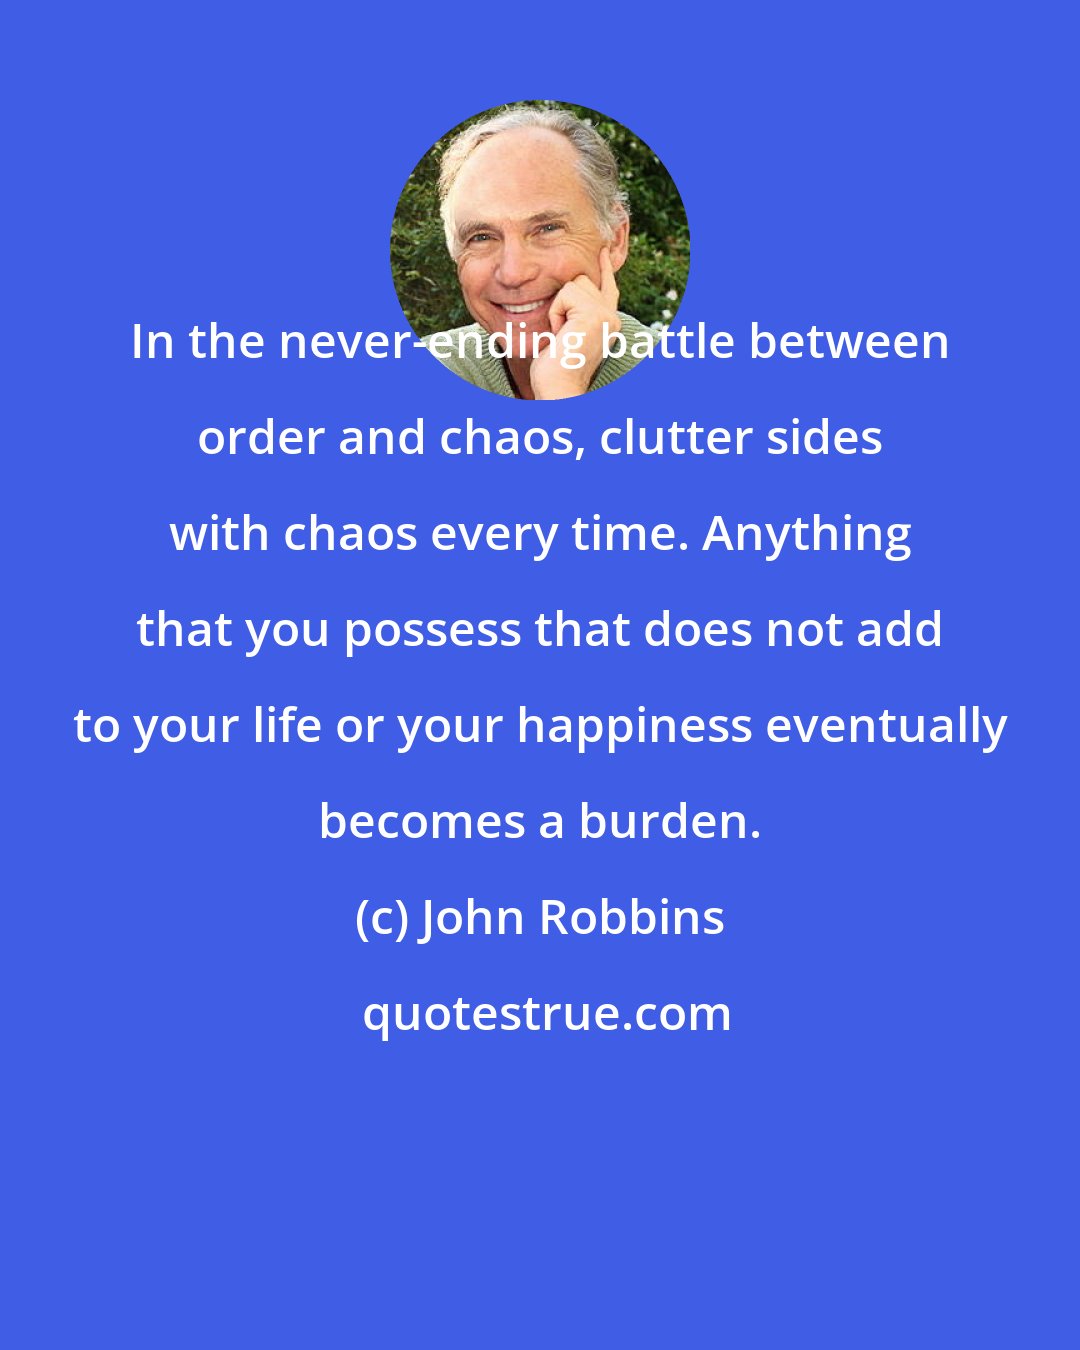 John Robbins: In the never-ending battle between order and chaos, clutter sides with chaos every time. Anything that you possess that does not add to your life or your happiness eventually becomes a burden.